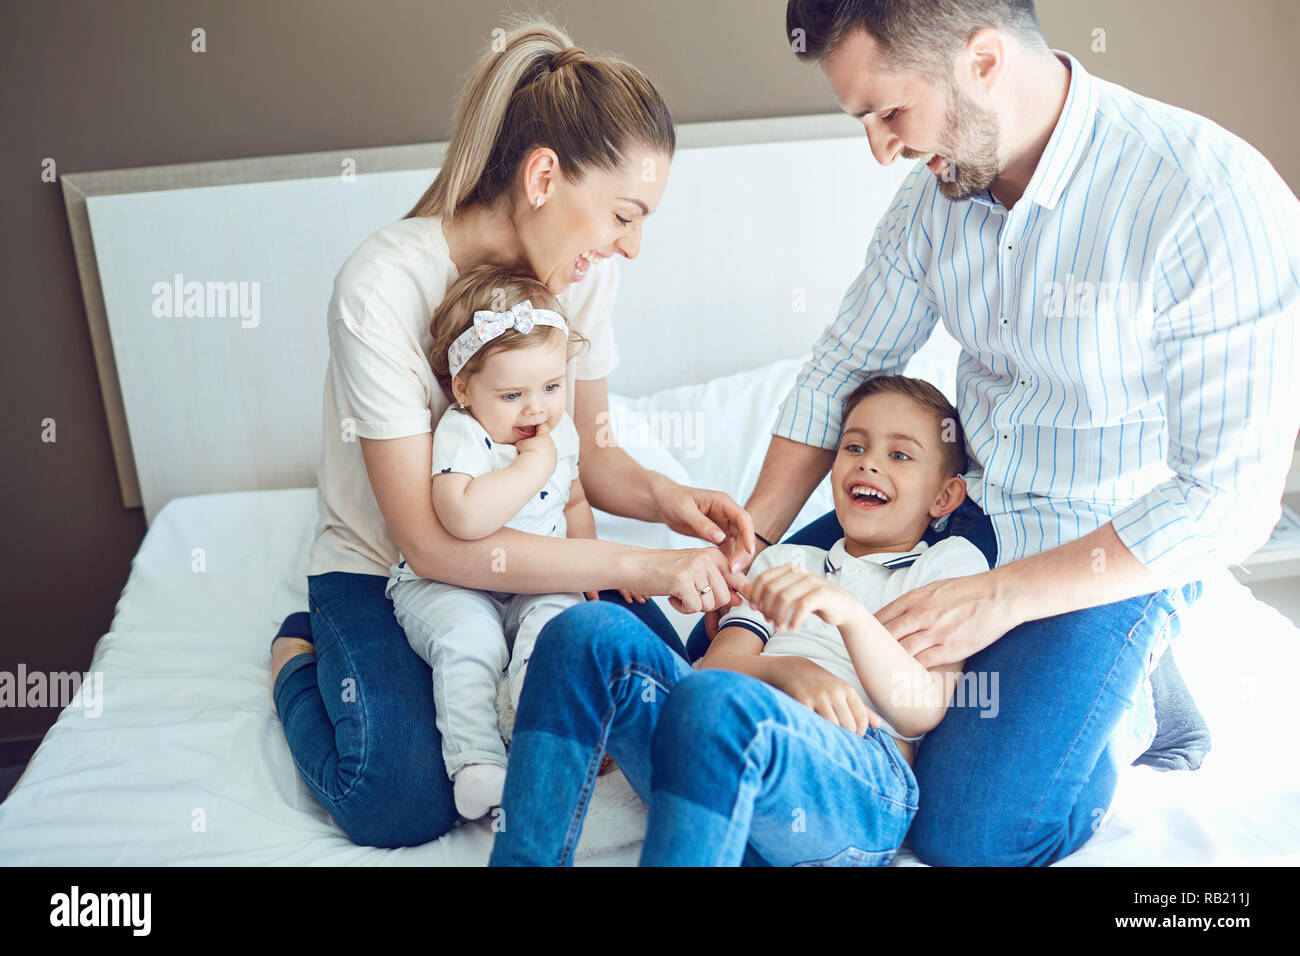 Happy family having fun playing lying on the bed. Stock Photo